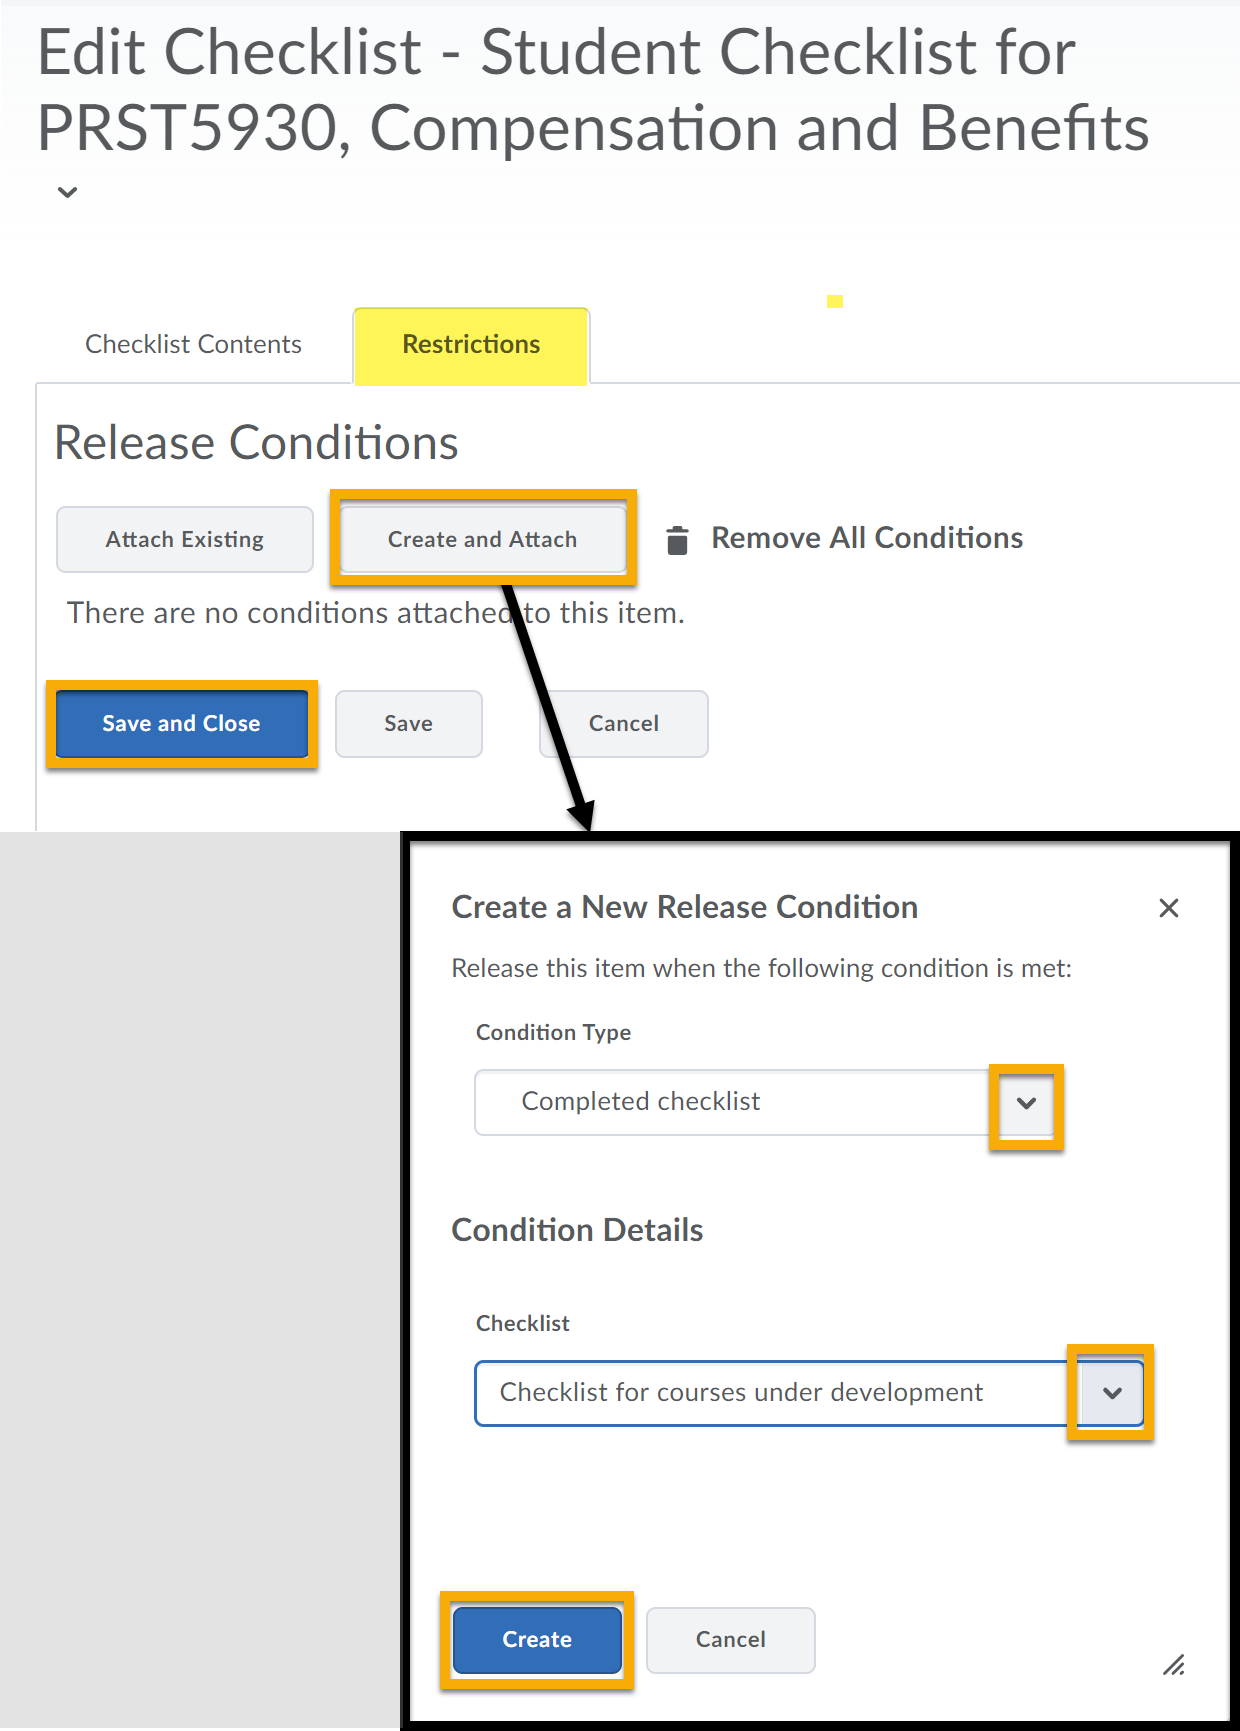 Restriction tab highlighted. Create and Attach highlighted with arrow pointting toward Create a New Release Condition window. Menus highlighted with sample choices. Create and Save and Close highlighted.